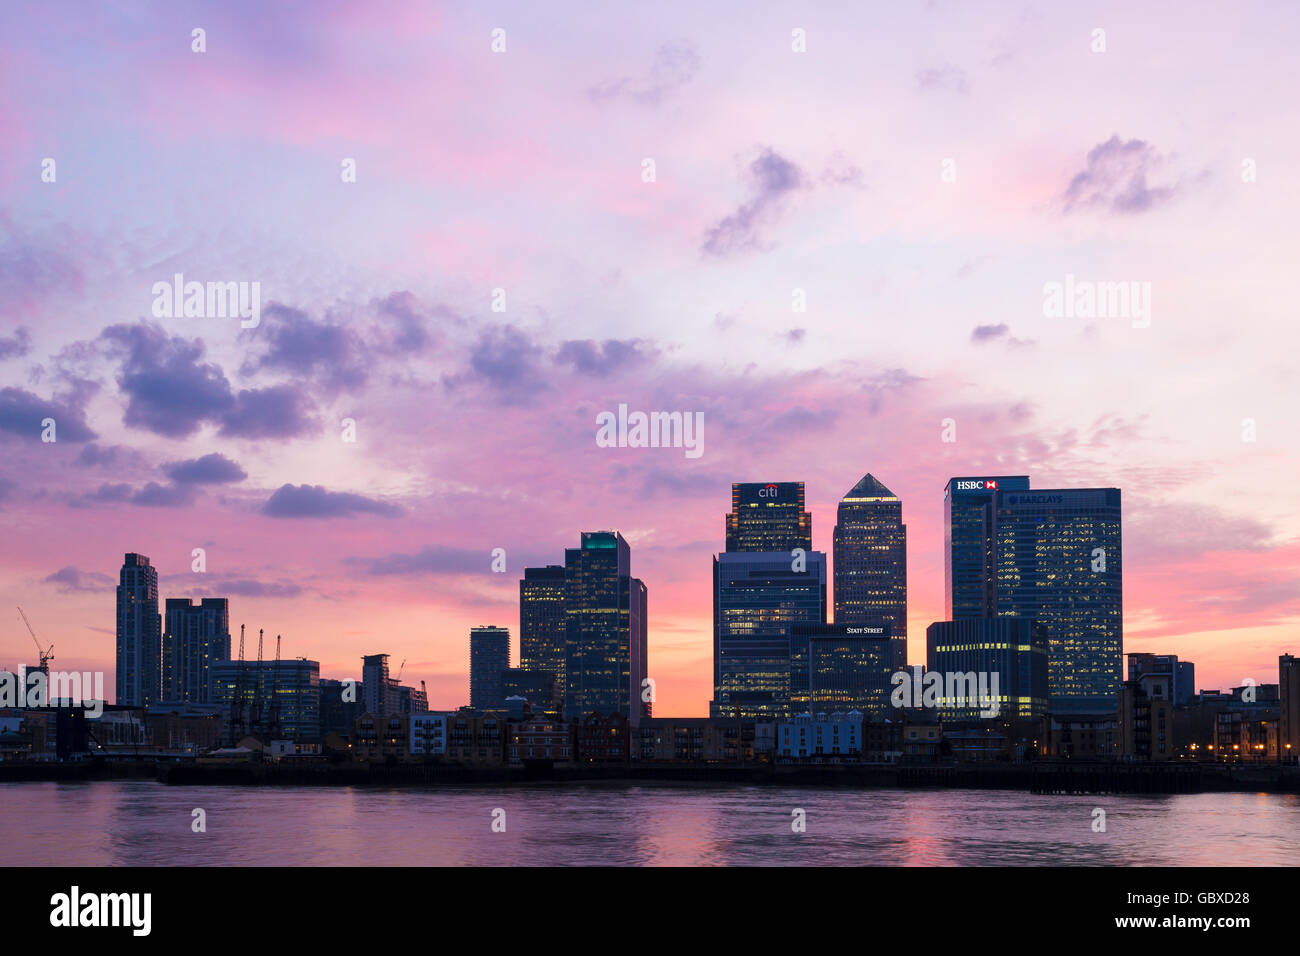 London Skyline at sunset, Canary Wharf, Angleterre Banque D'Images